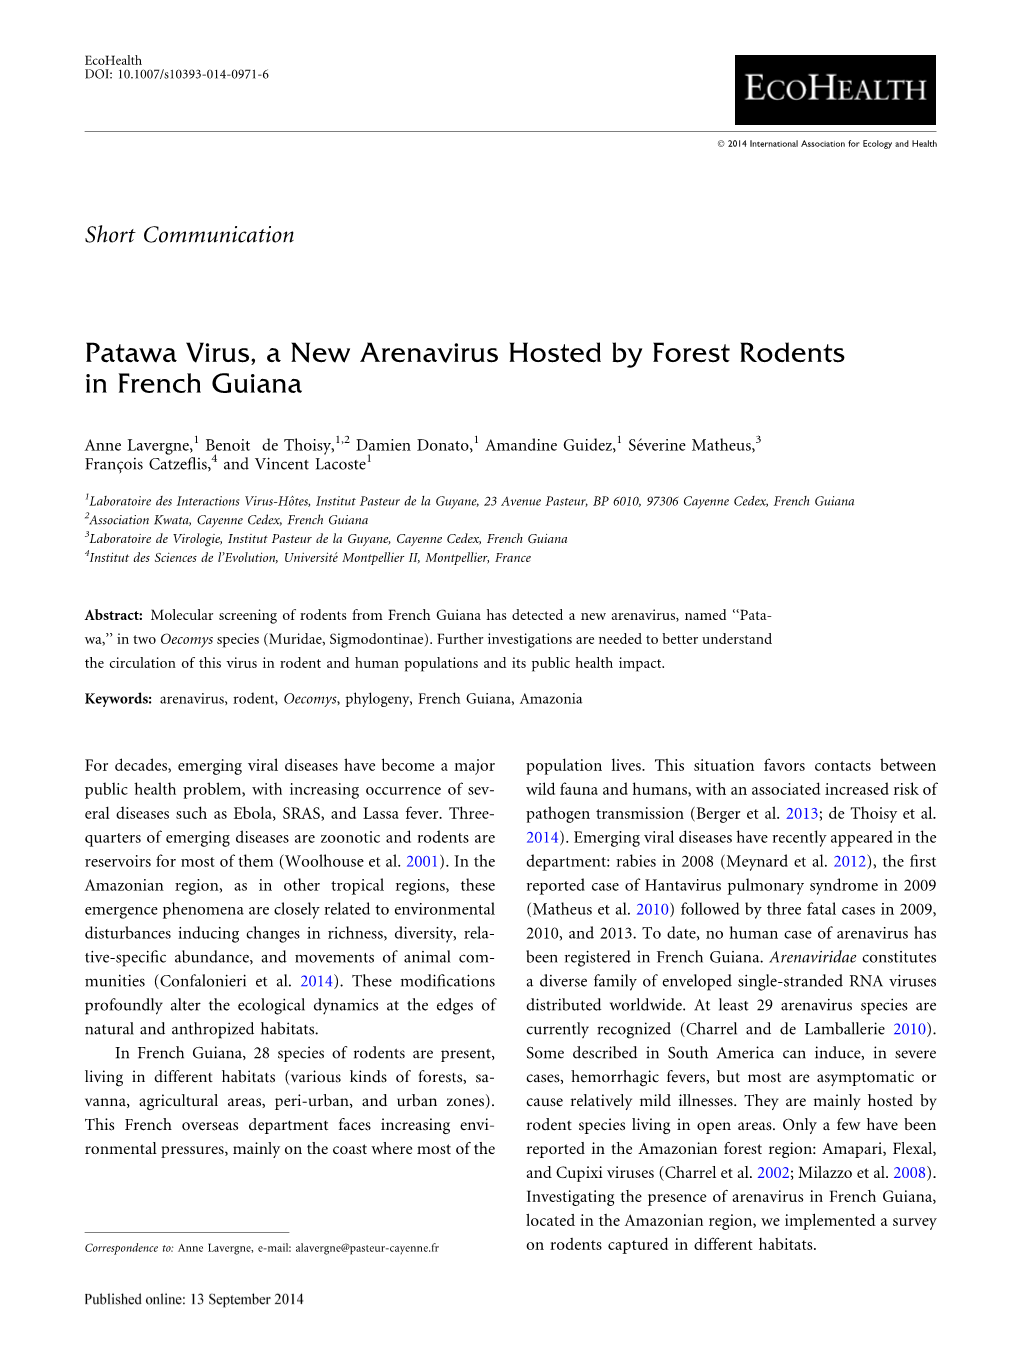 Patawa Virus, a New Arenavirus Hosted by Forest Rodents in French Guiana